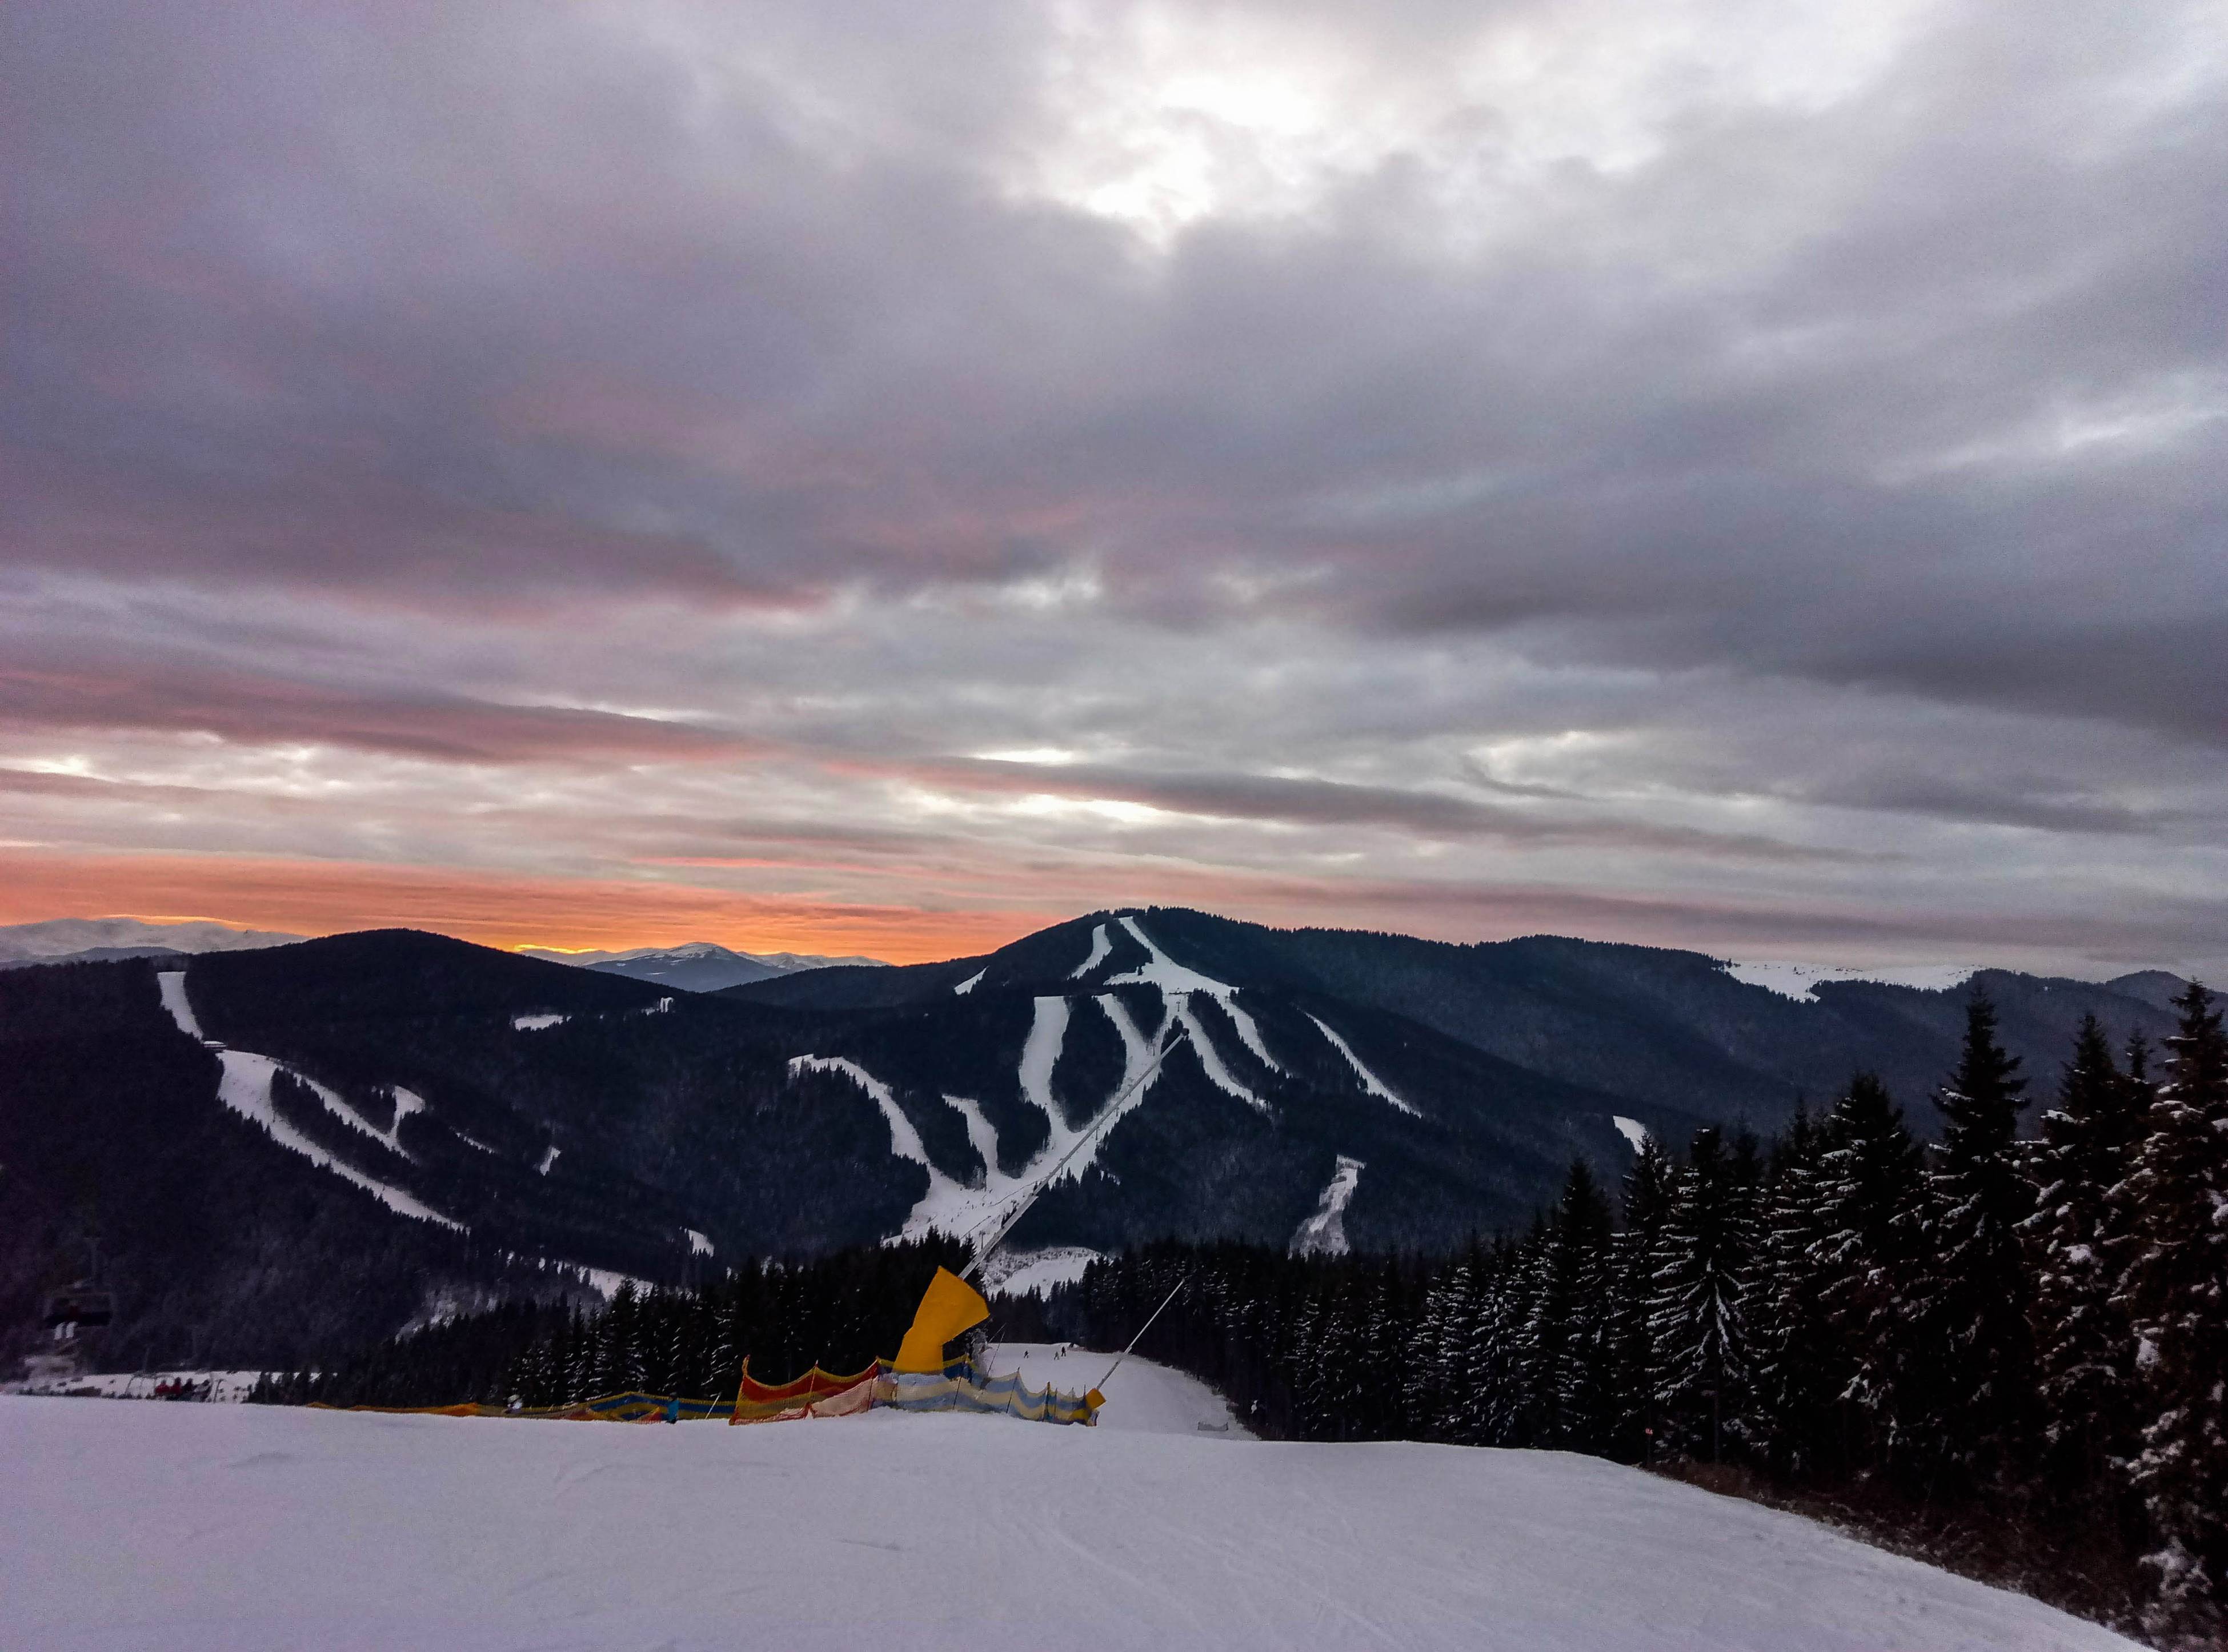 My trip to the ski resort Bukovel. Part 2 - Winter sunset in the mountains